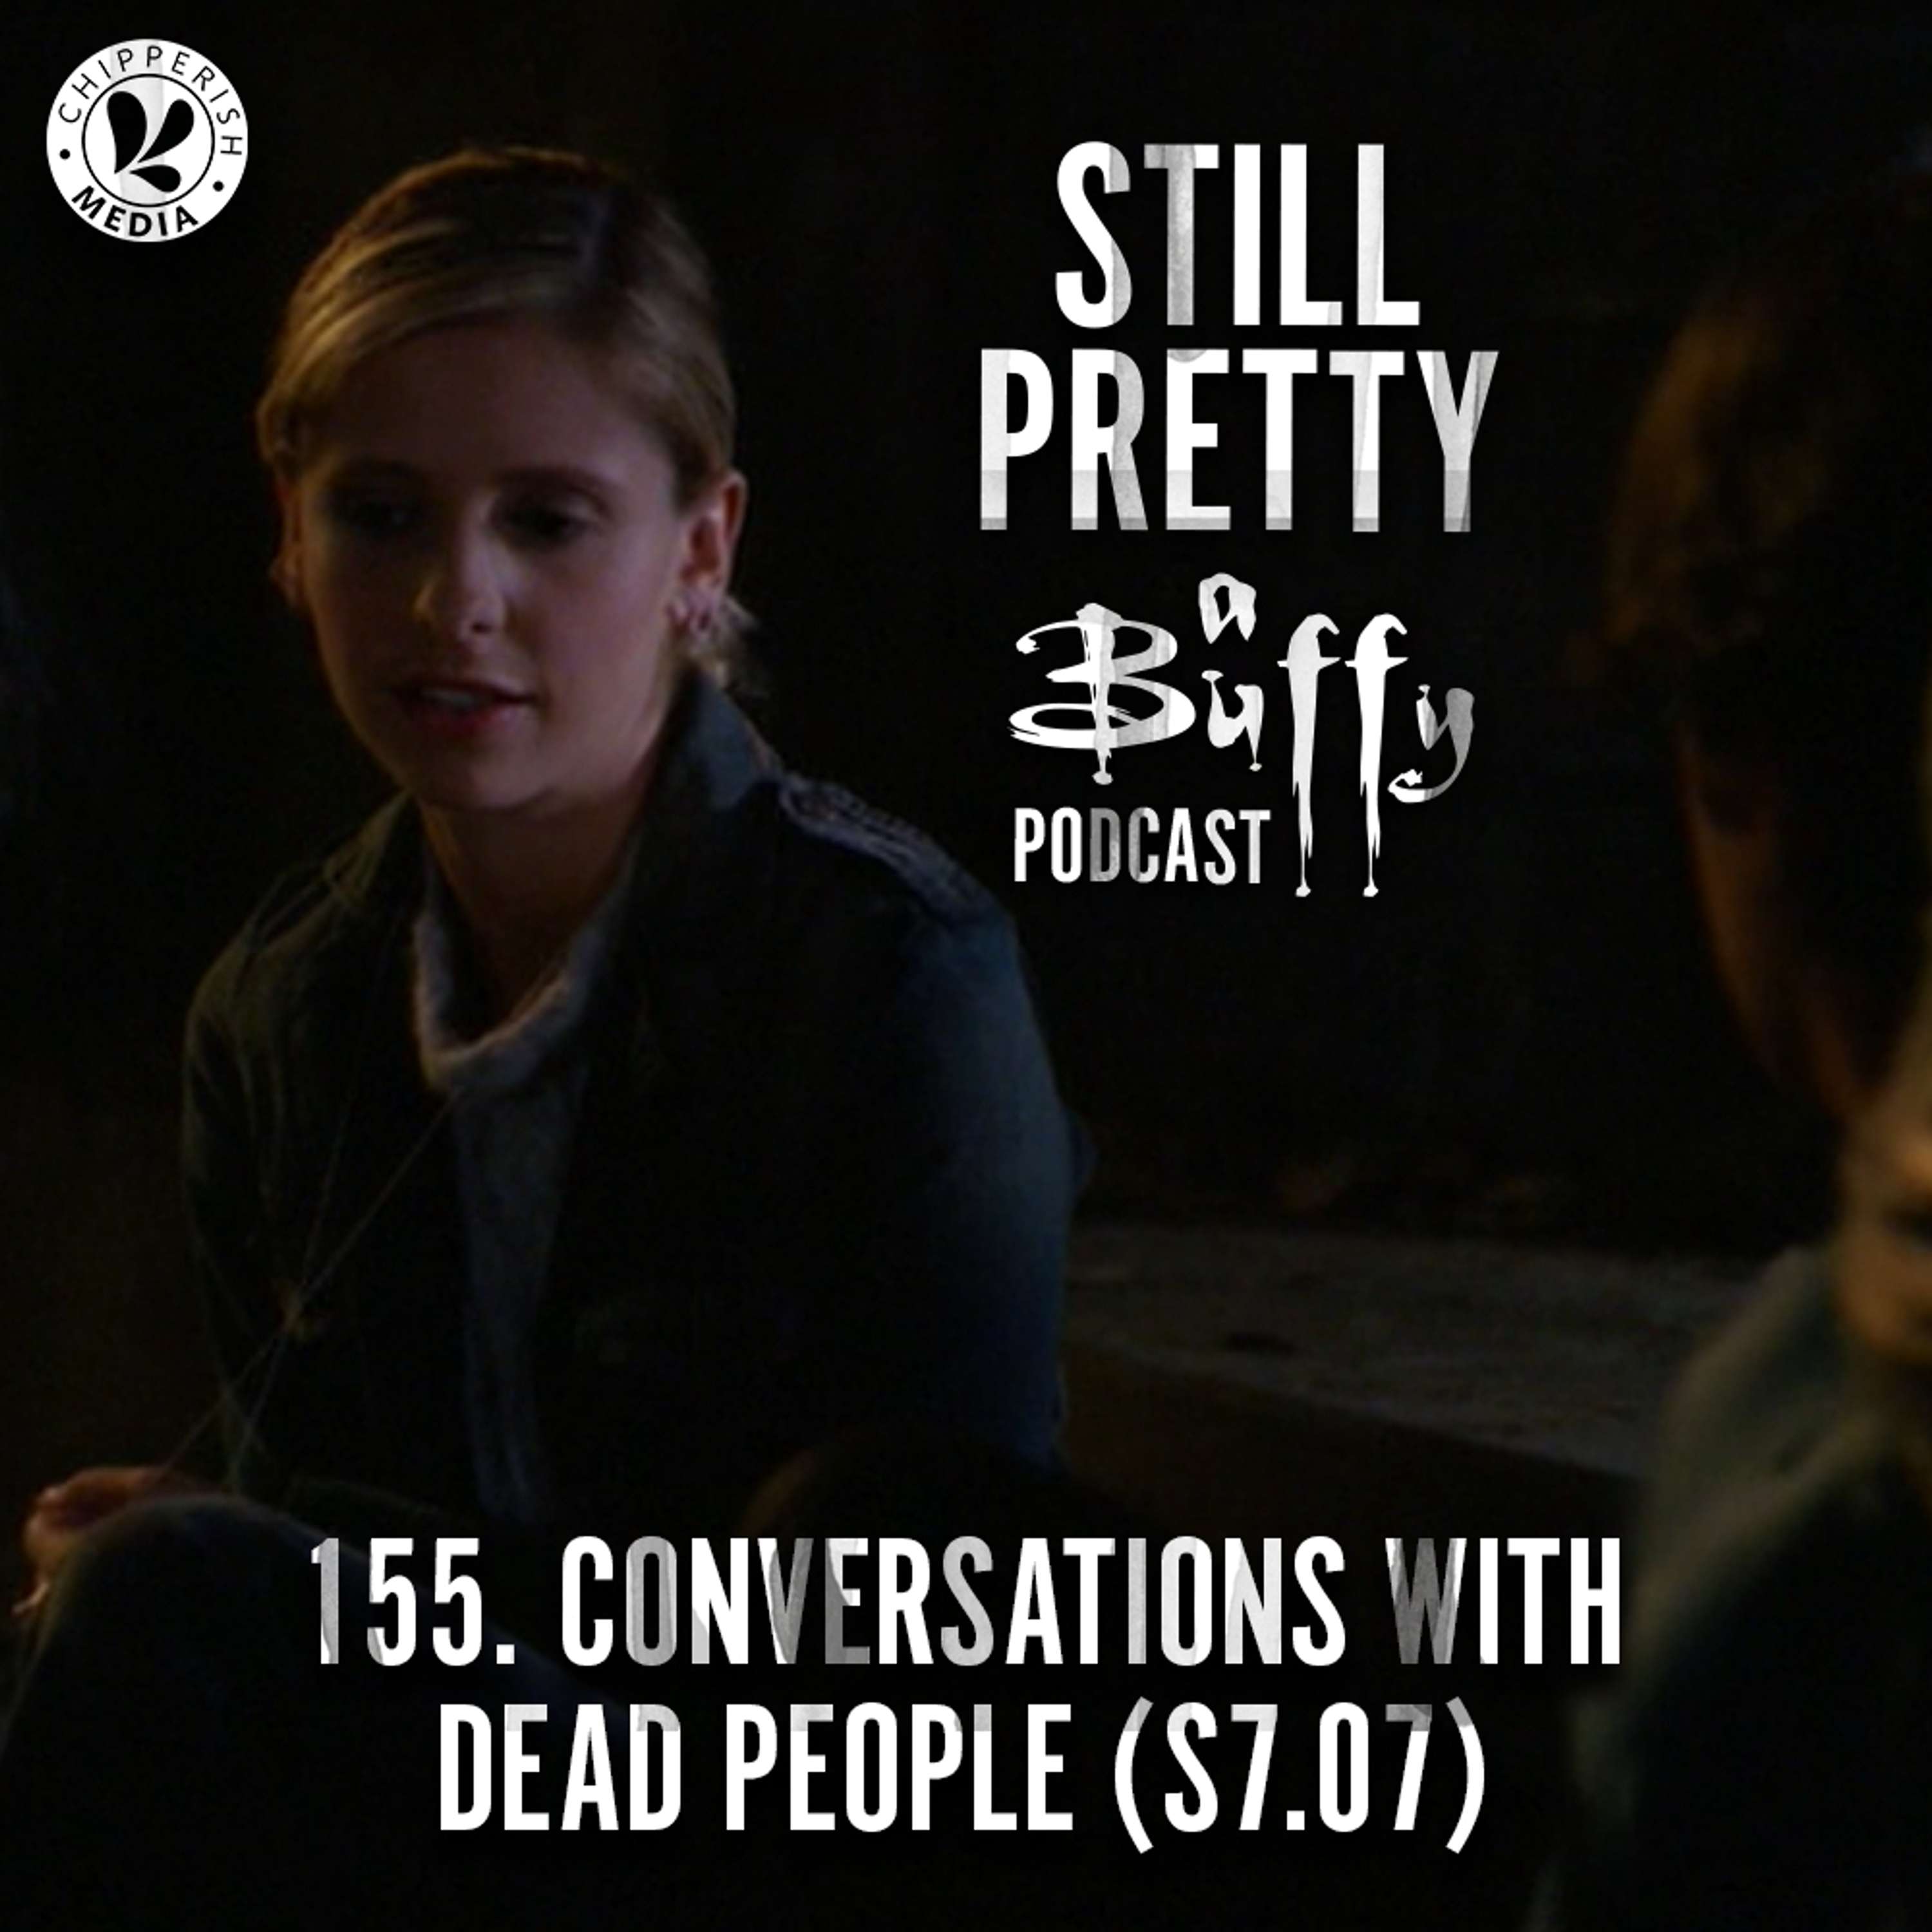 Conversations With Dead People (S7.07)